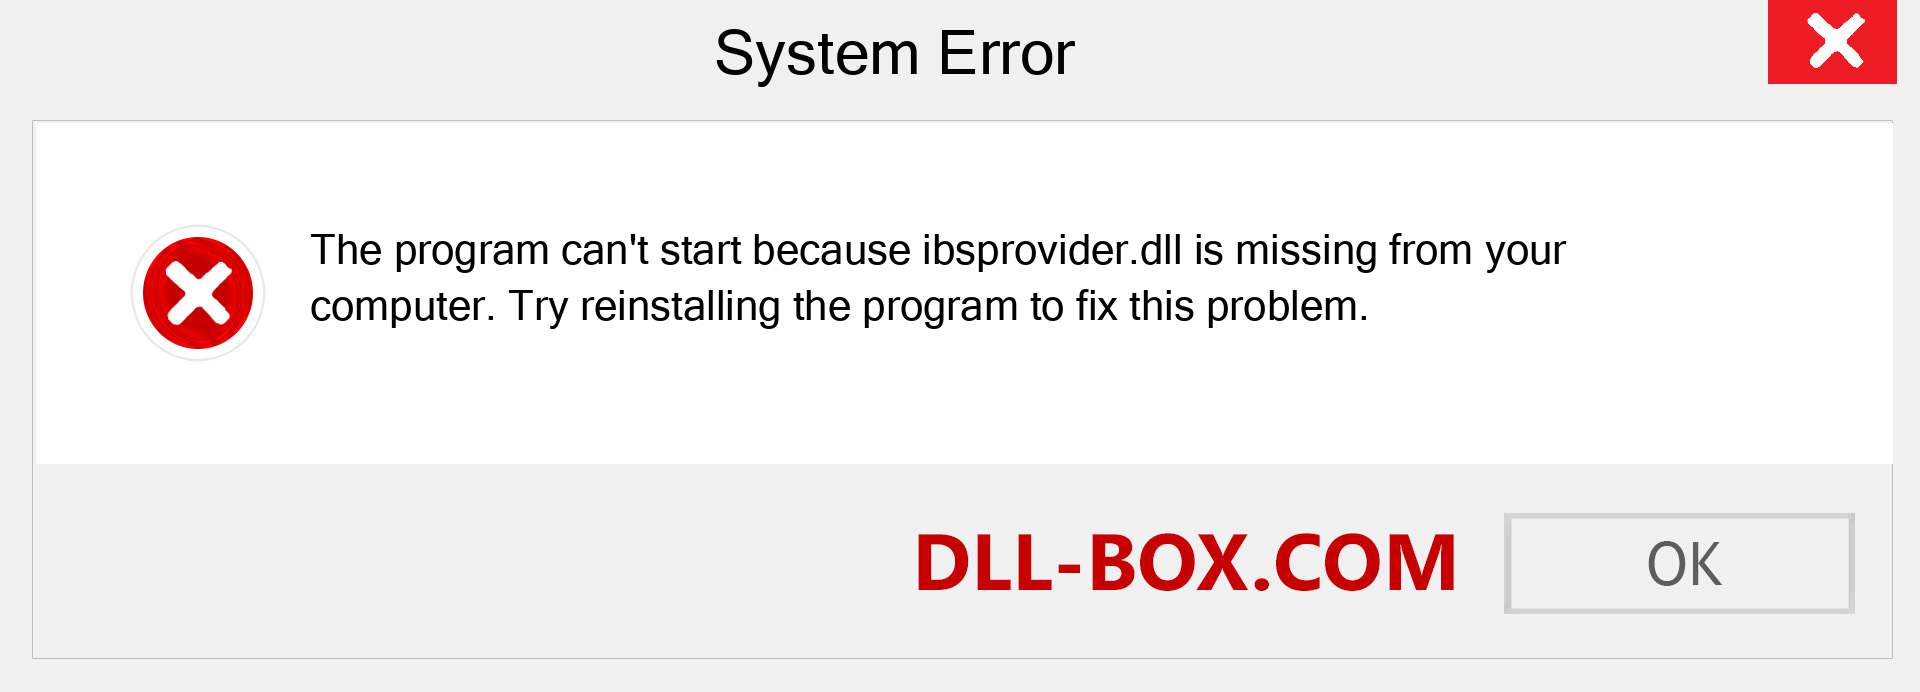  ibsprovider.dll file is missing?. Download for Windows 7, 8, 10 - Fix  ibsprovider dll Missing Error on Windows, photos, images